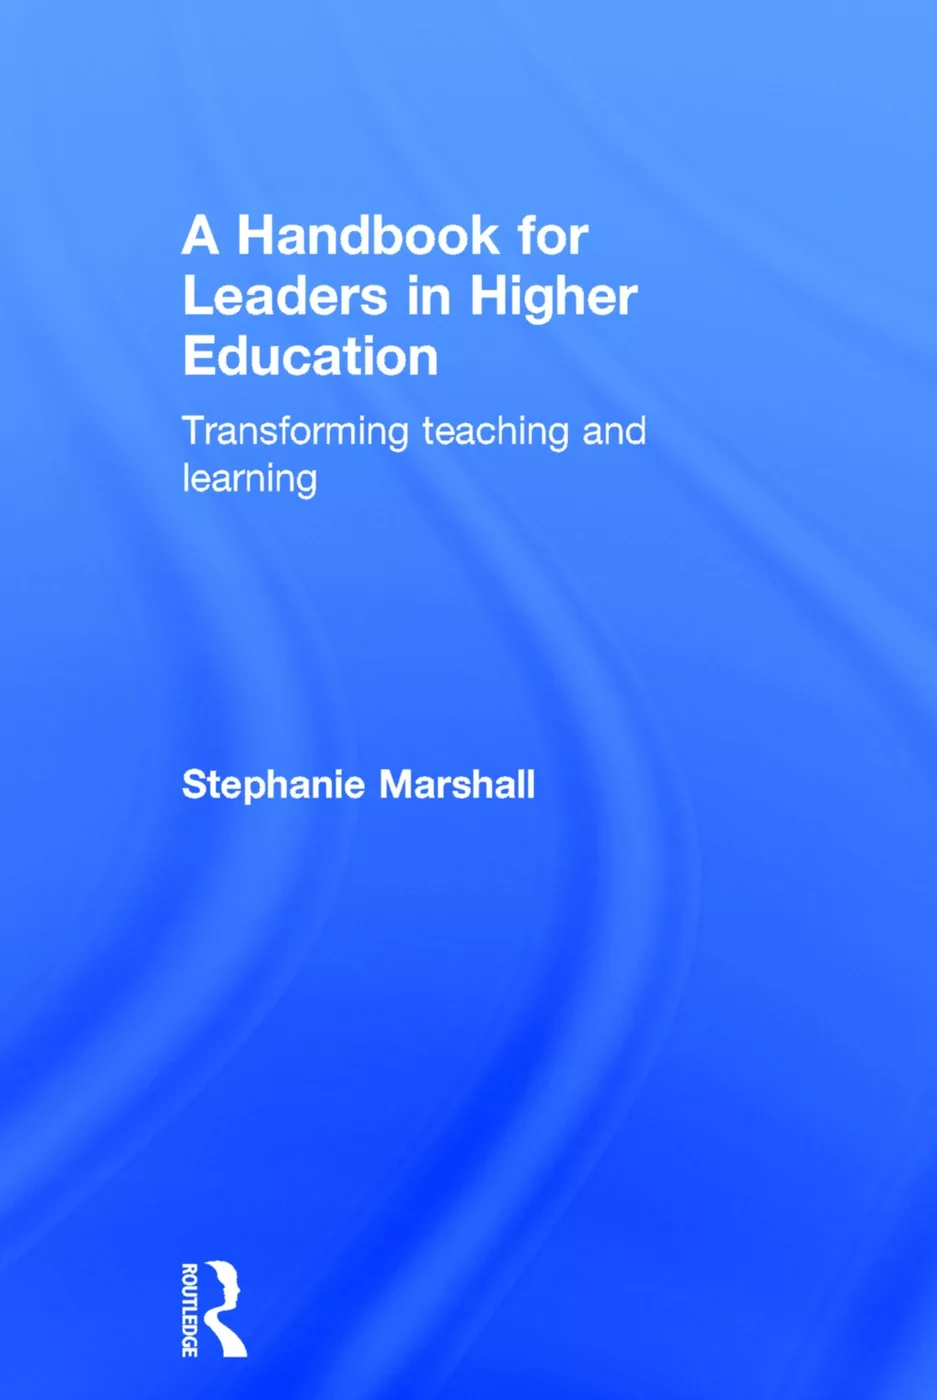 A Handbook for Leaders in Higher Education: Transforming Teaching and Learning